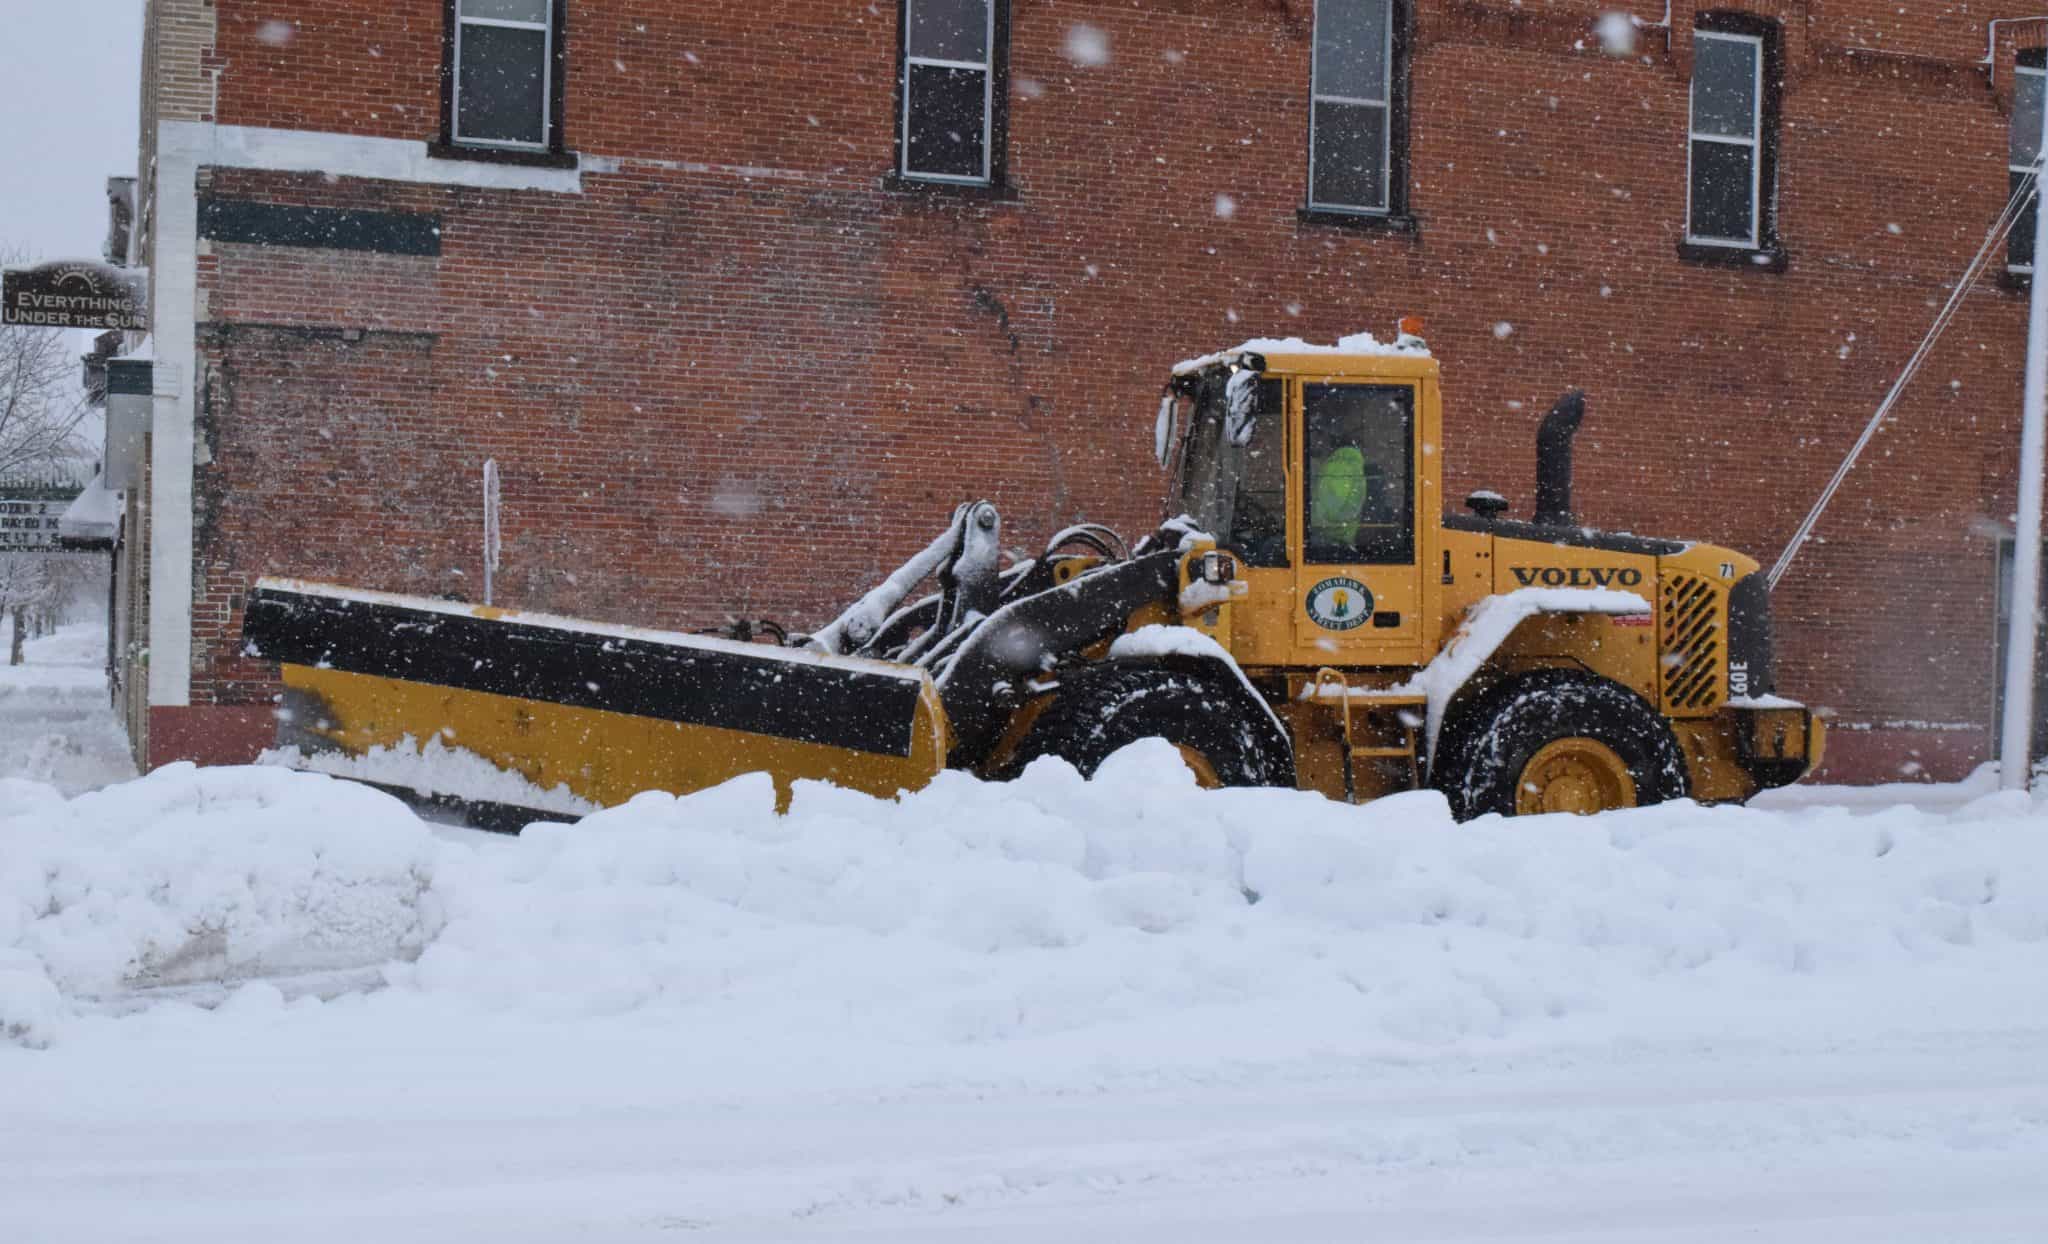 “The show must go on”: Cole discusses continued snow removal efforts, praises city employees